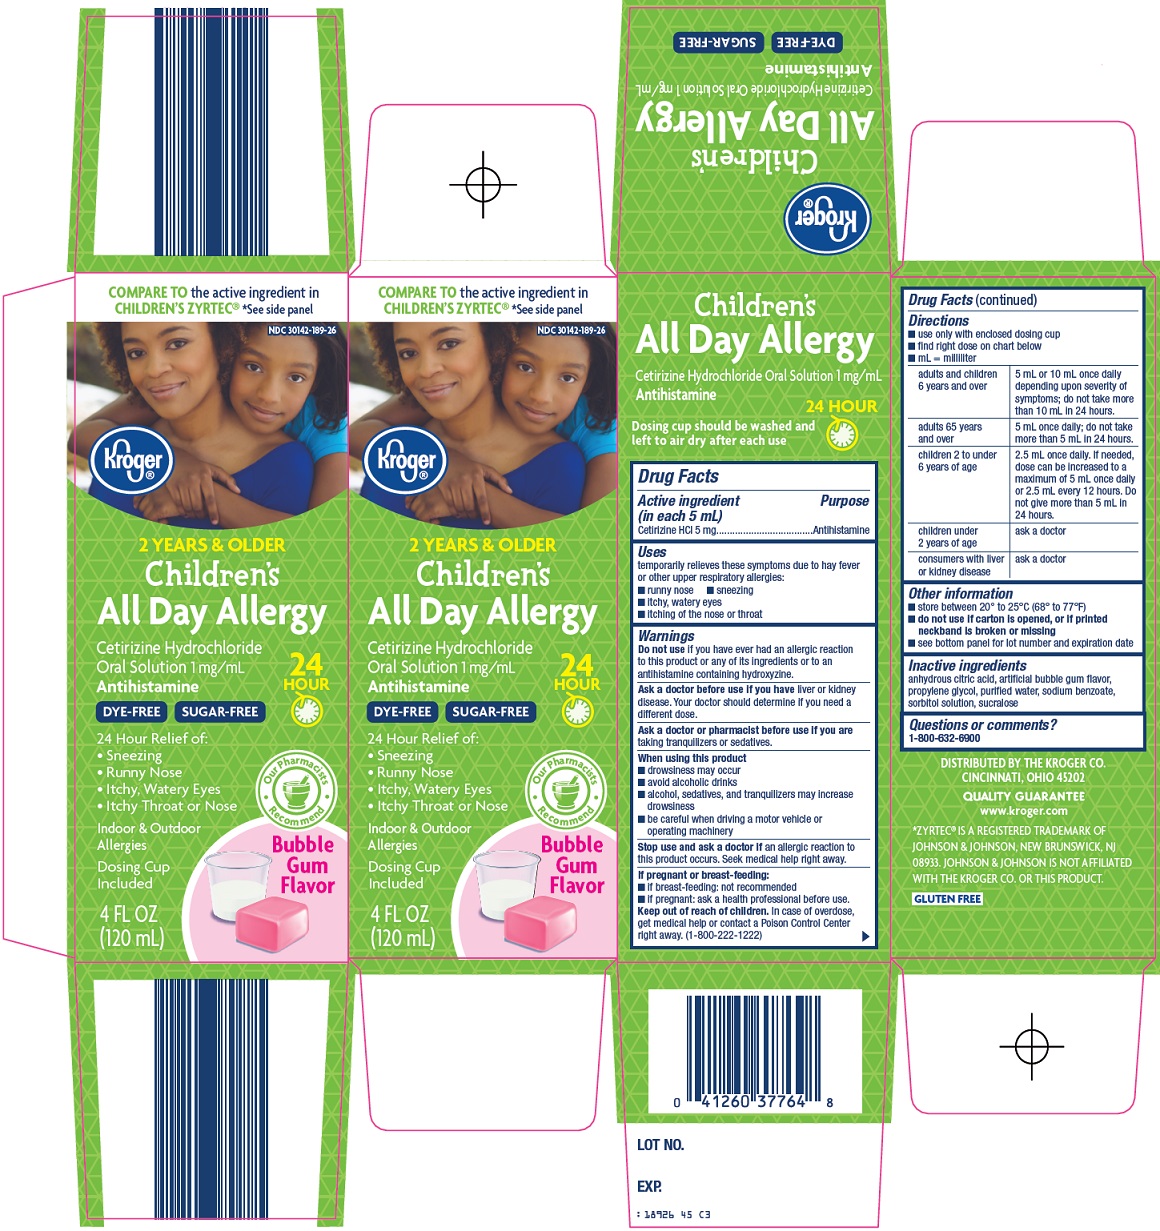 Childrens All Day Allergy Image